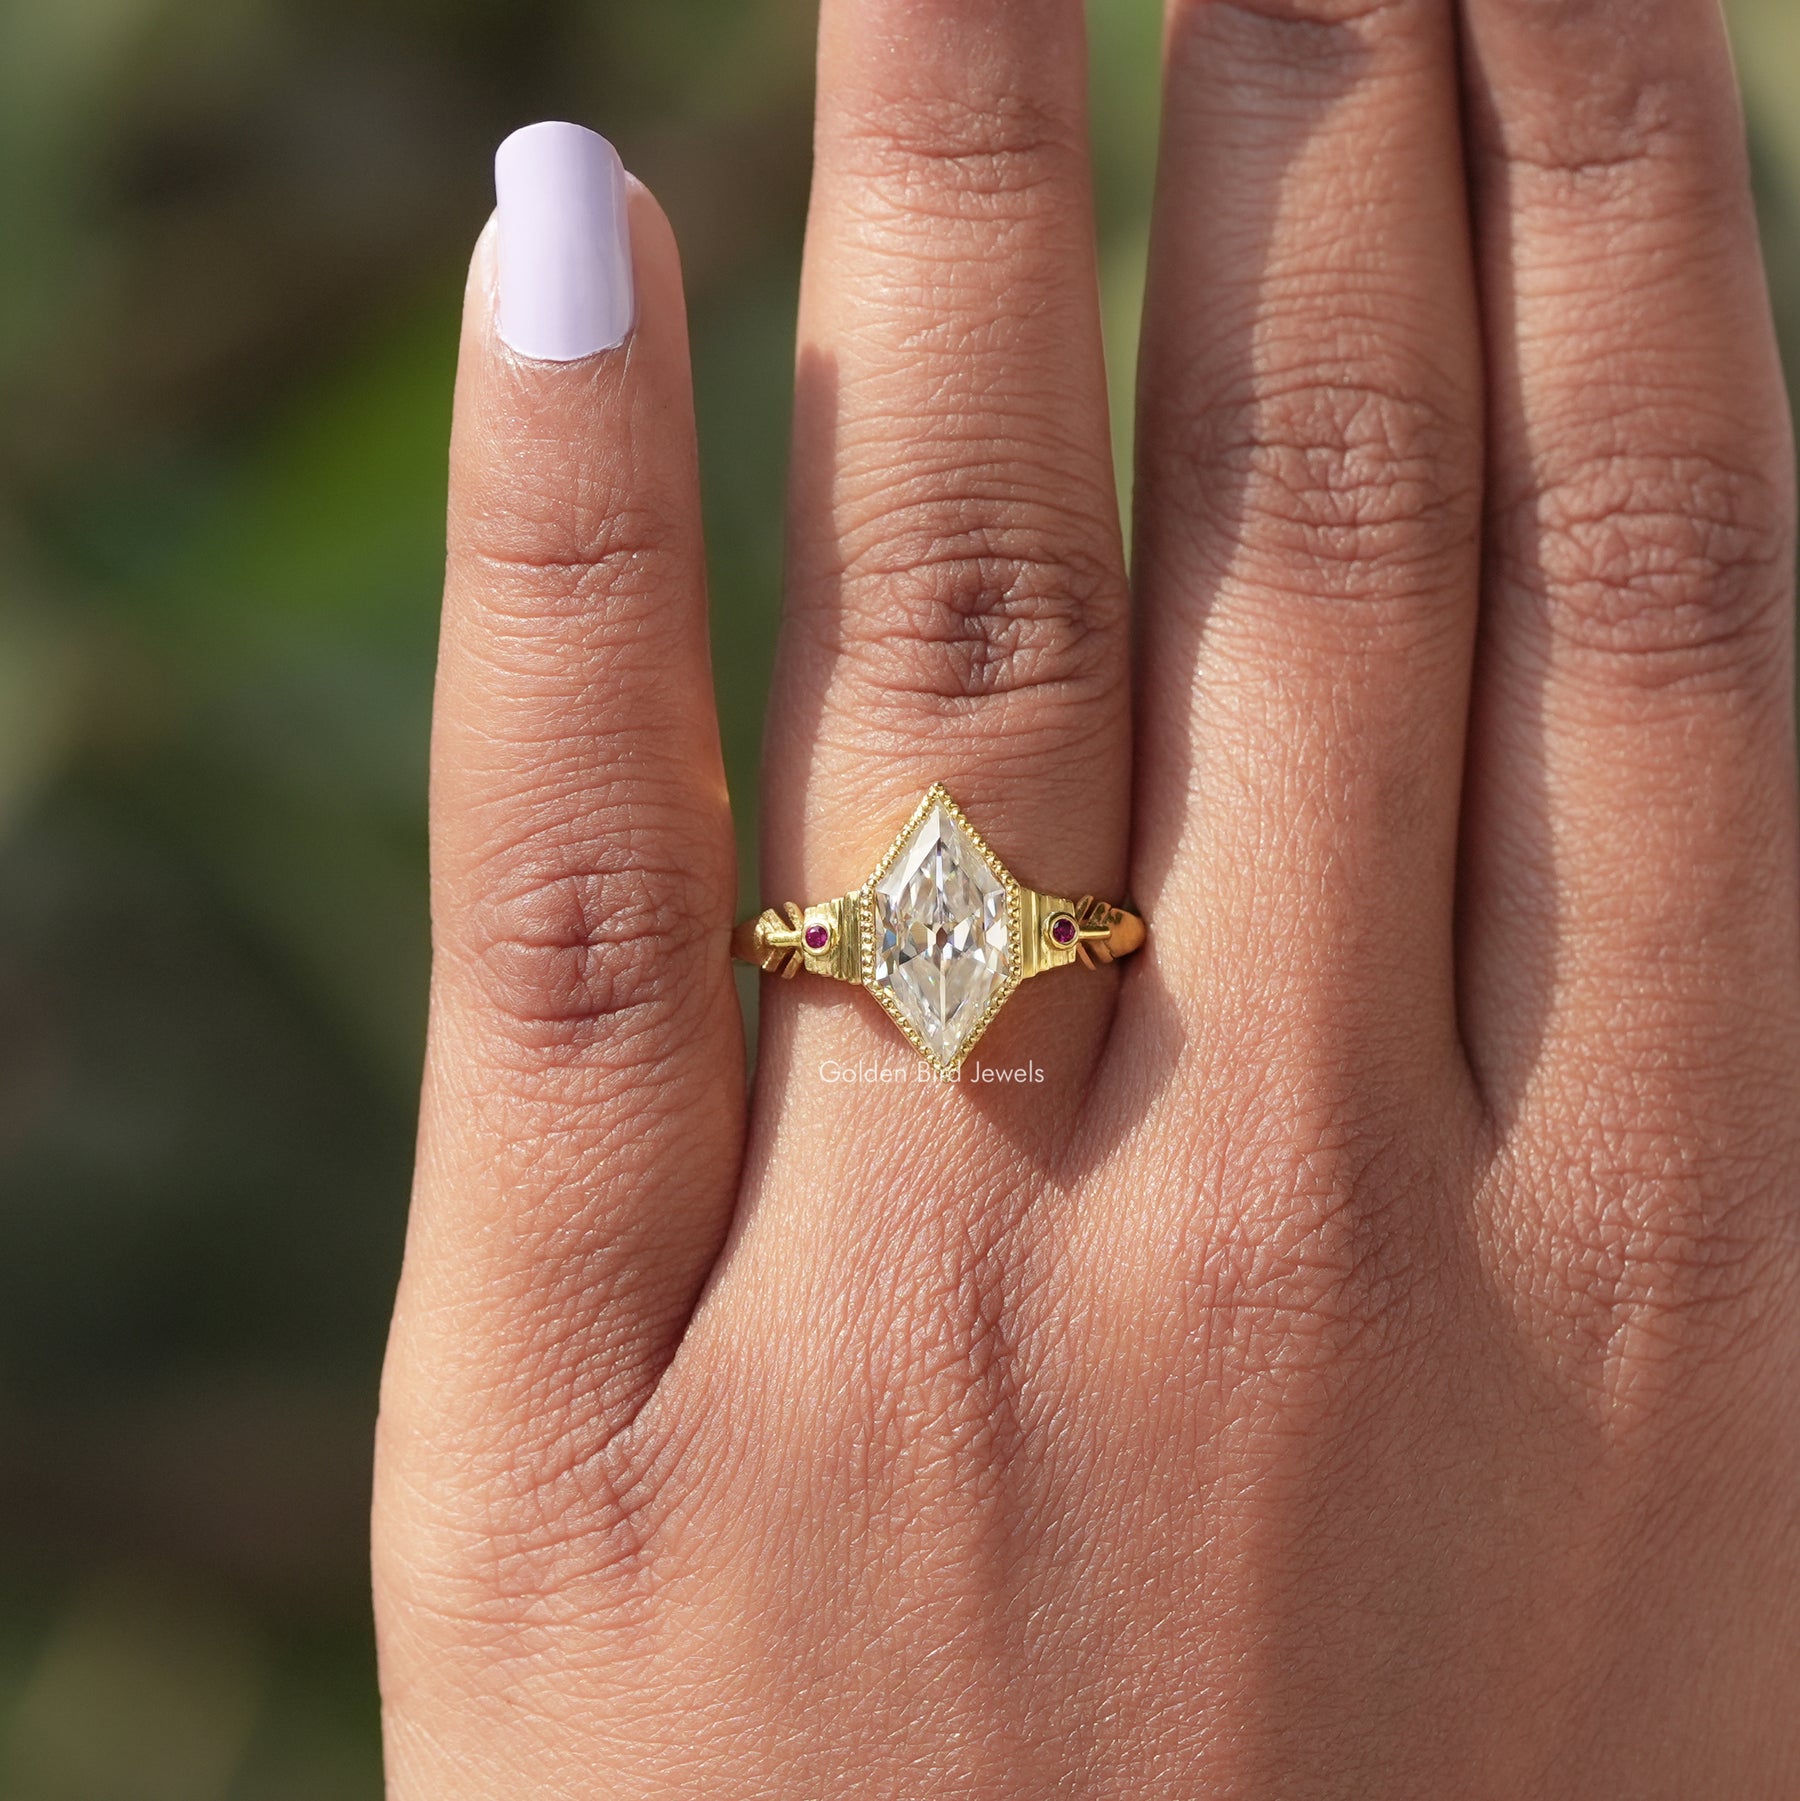 [In finger front view of marquise cut moissanite ring made of VVS clarity]-[Golden Bird Jewels]